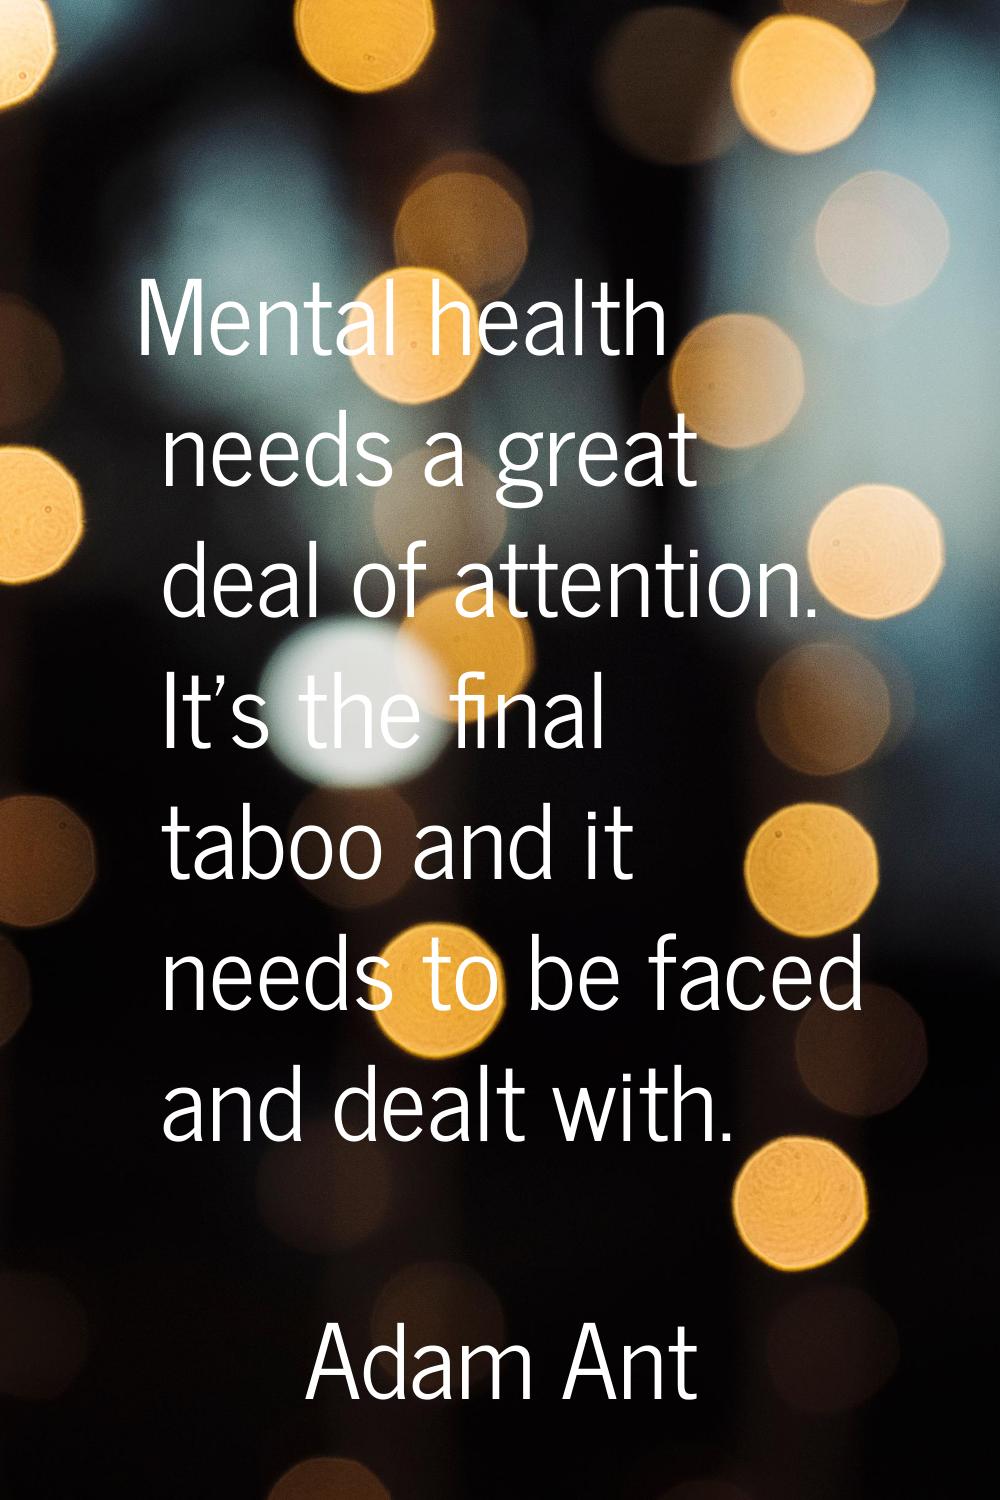 Mental health needs a great deal of attention. It's the final taboo and it needs to be faced and de